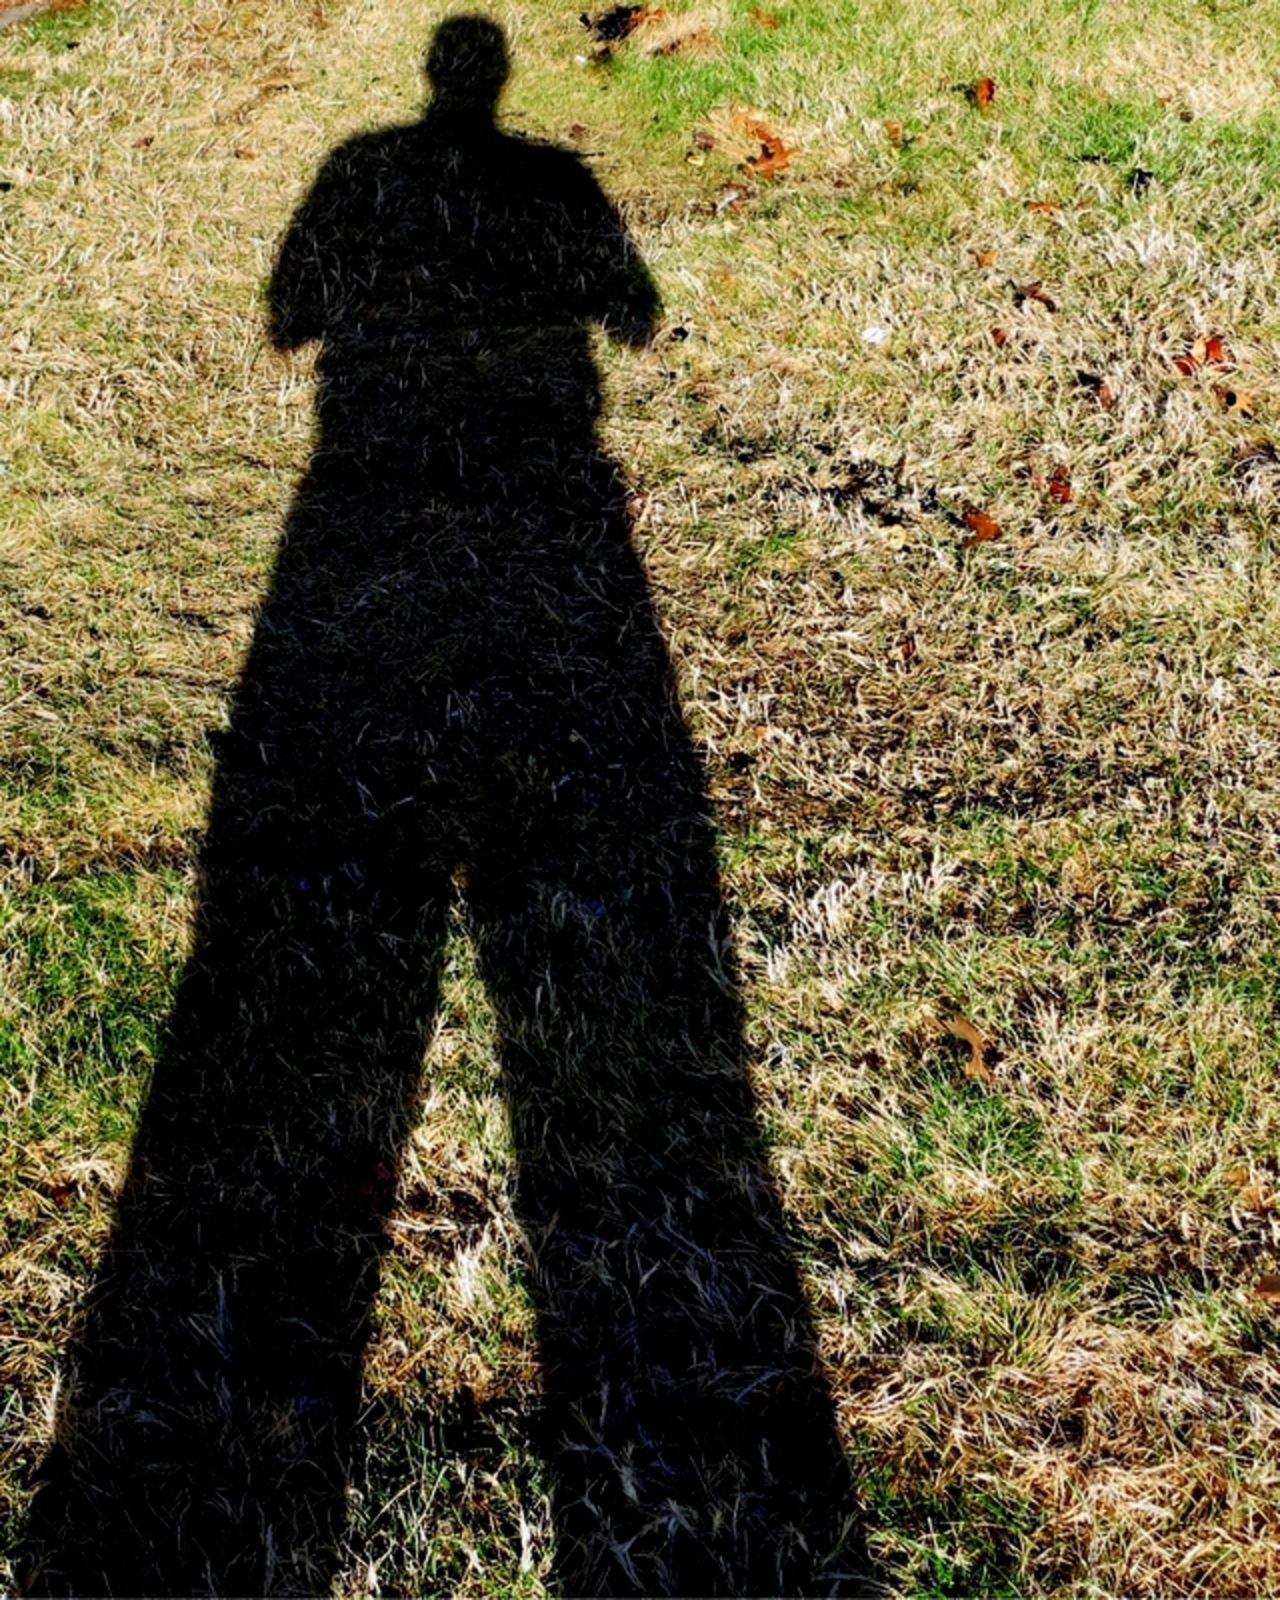 Snapping this photo of his shadow on at 9:33 a.m. in Springfield, Missouri, <a href="http://ireport.cnn.com/docs/DOC-919552" target="_blank">iReporter Michael Goodling</a> is betting on a shorter winter.